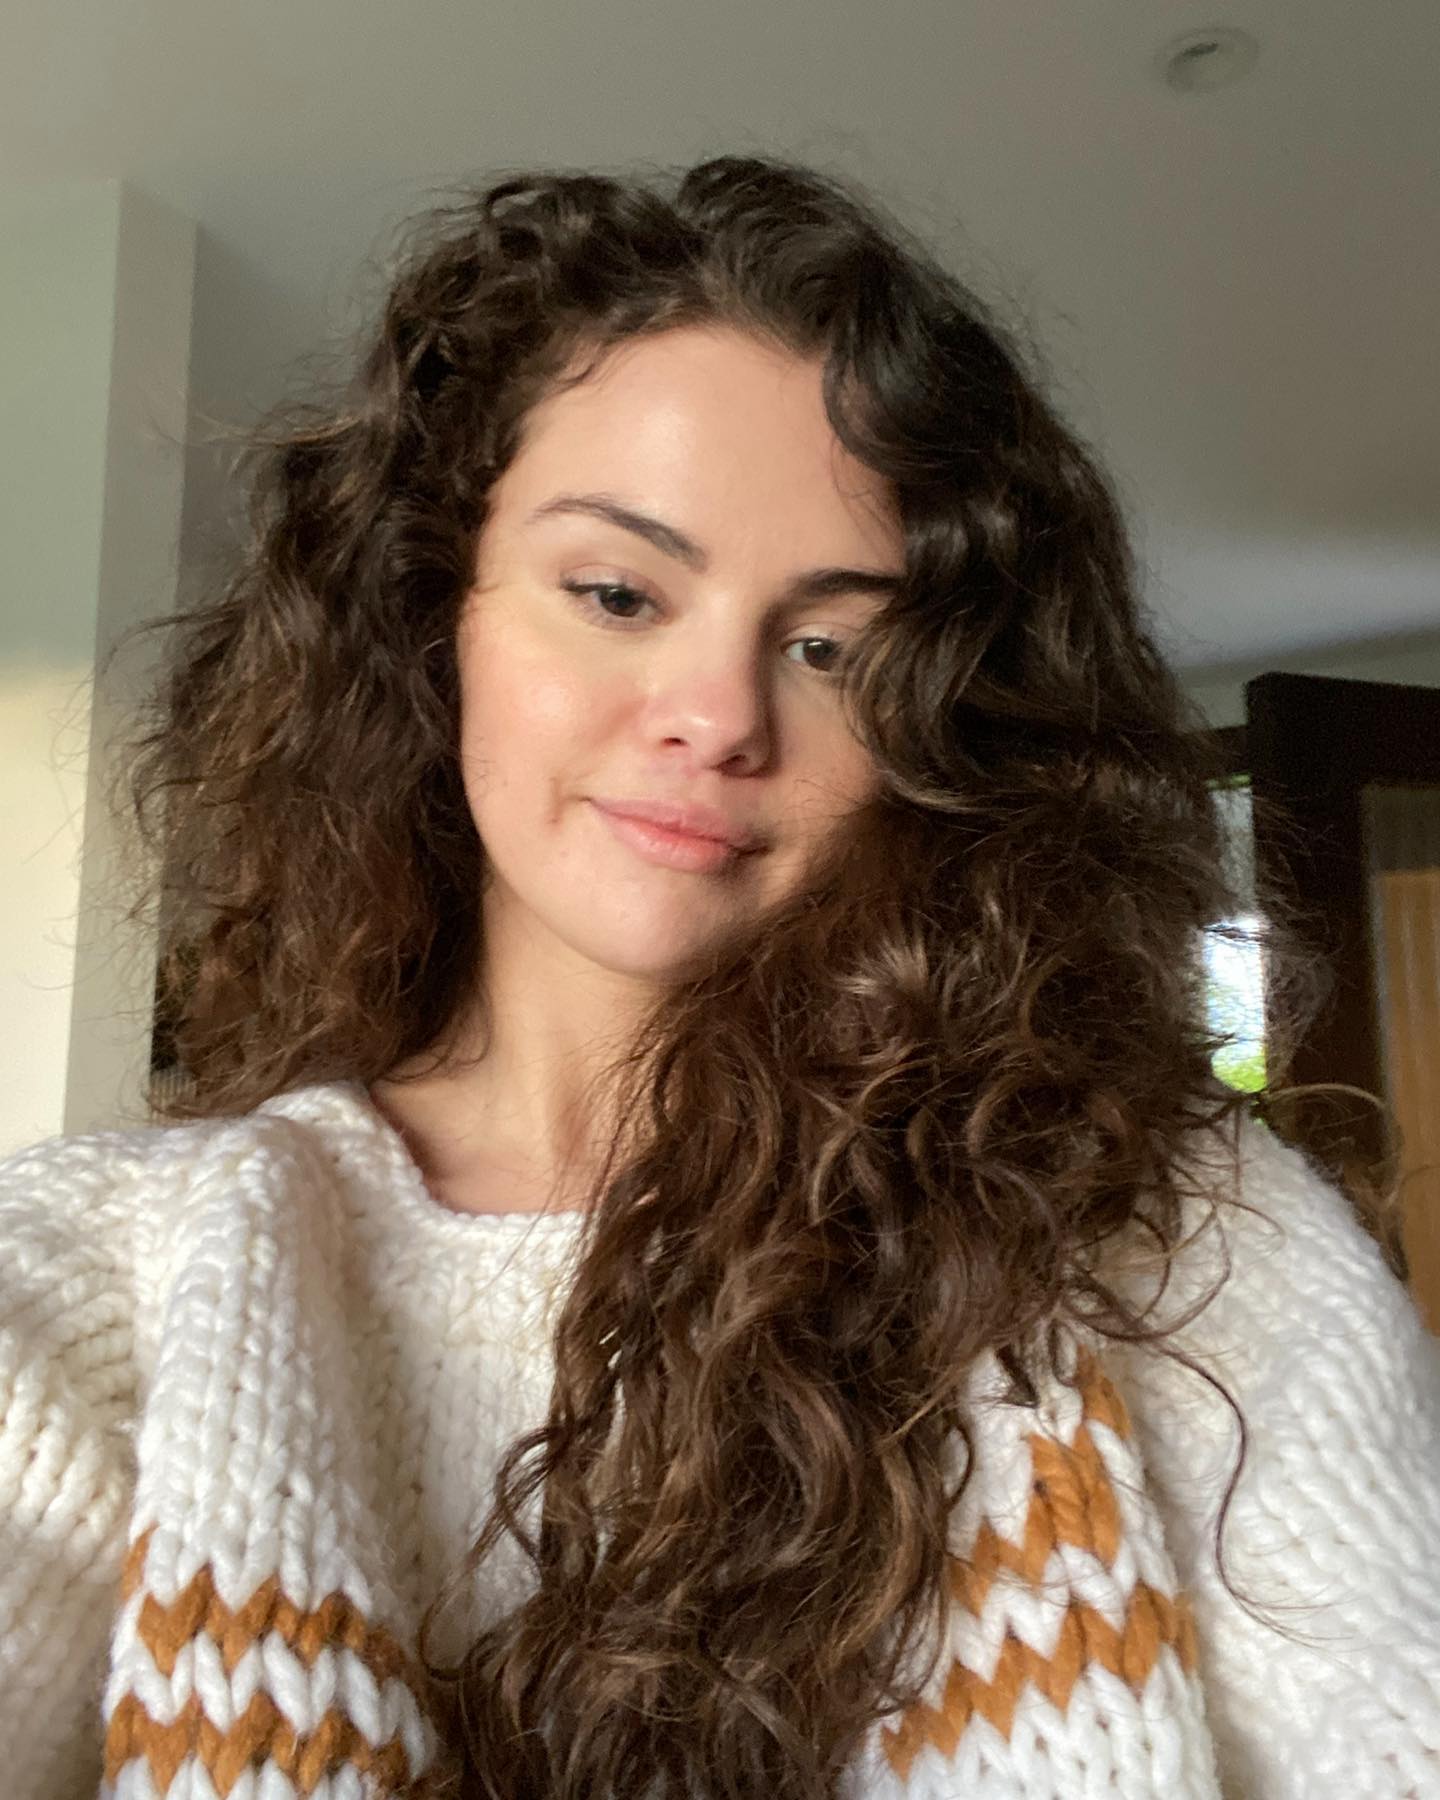 Selena Gomez with her natural curly hair